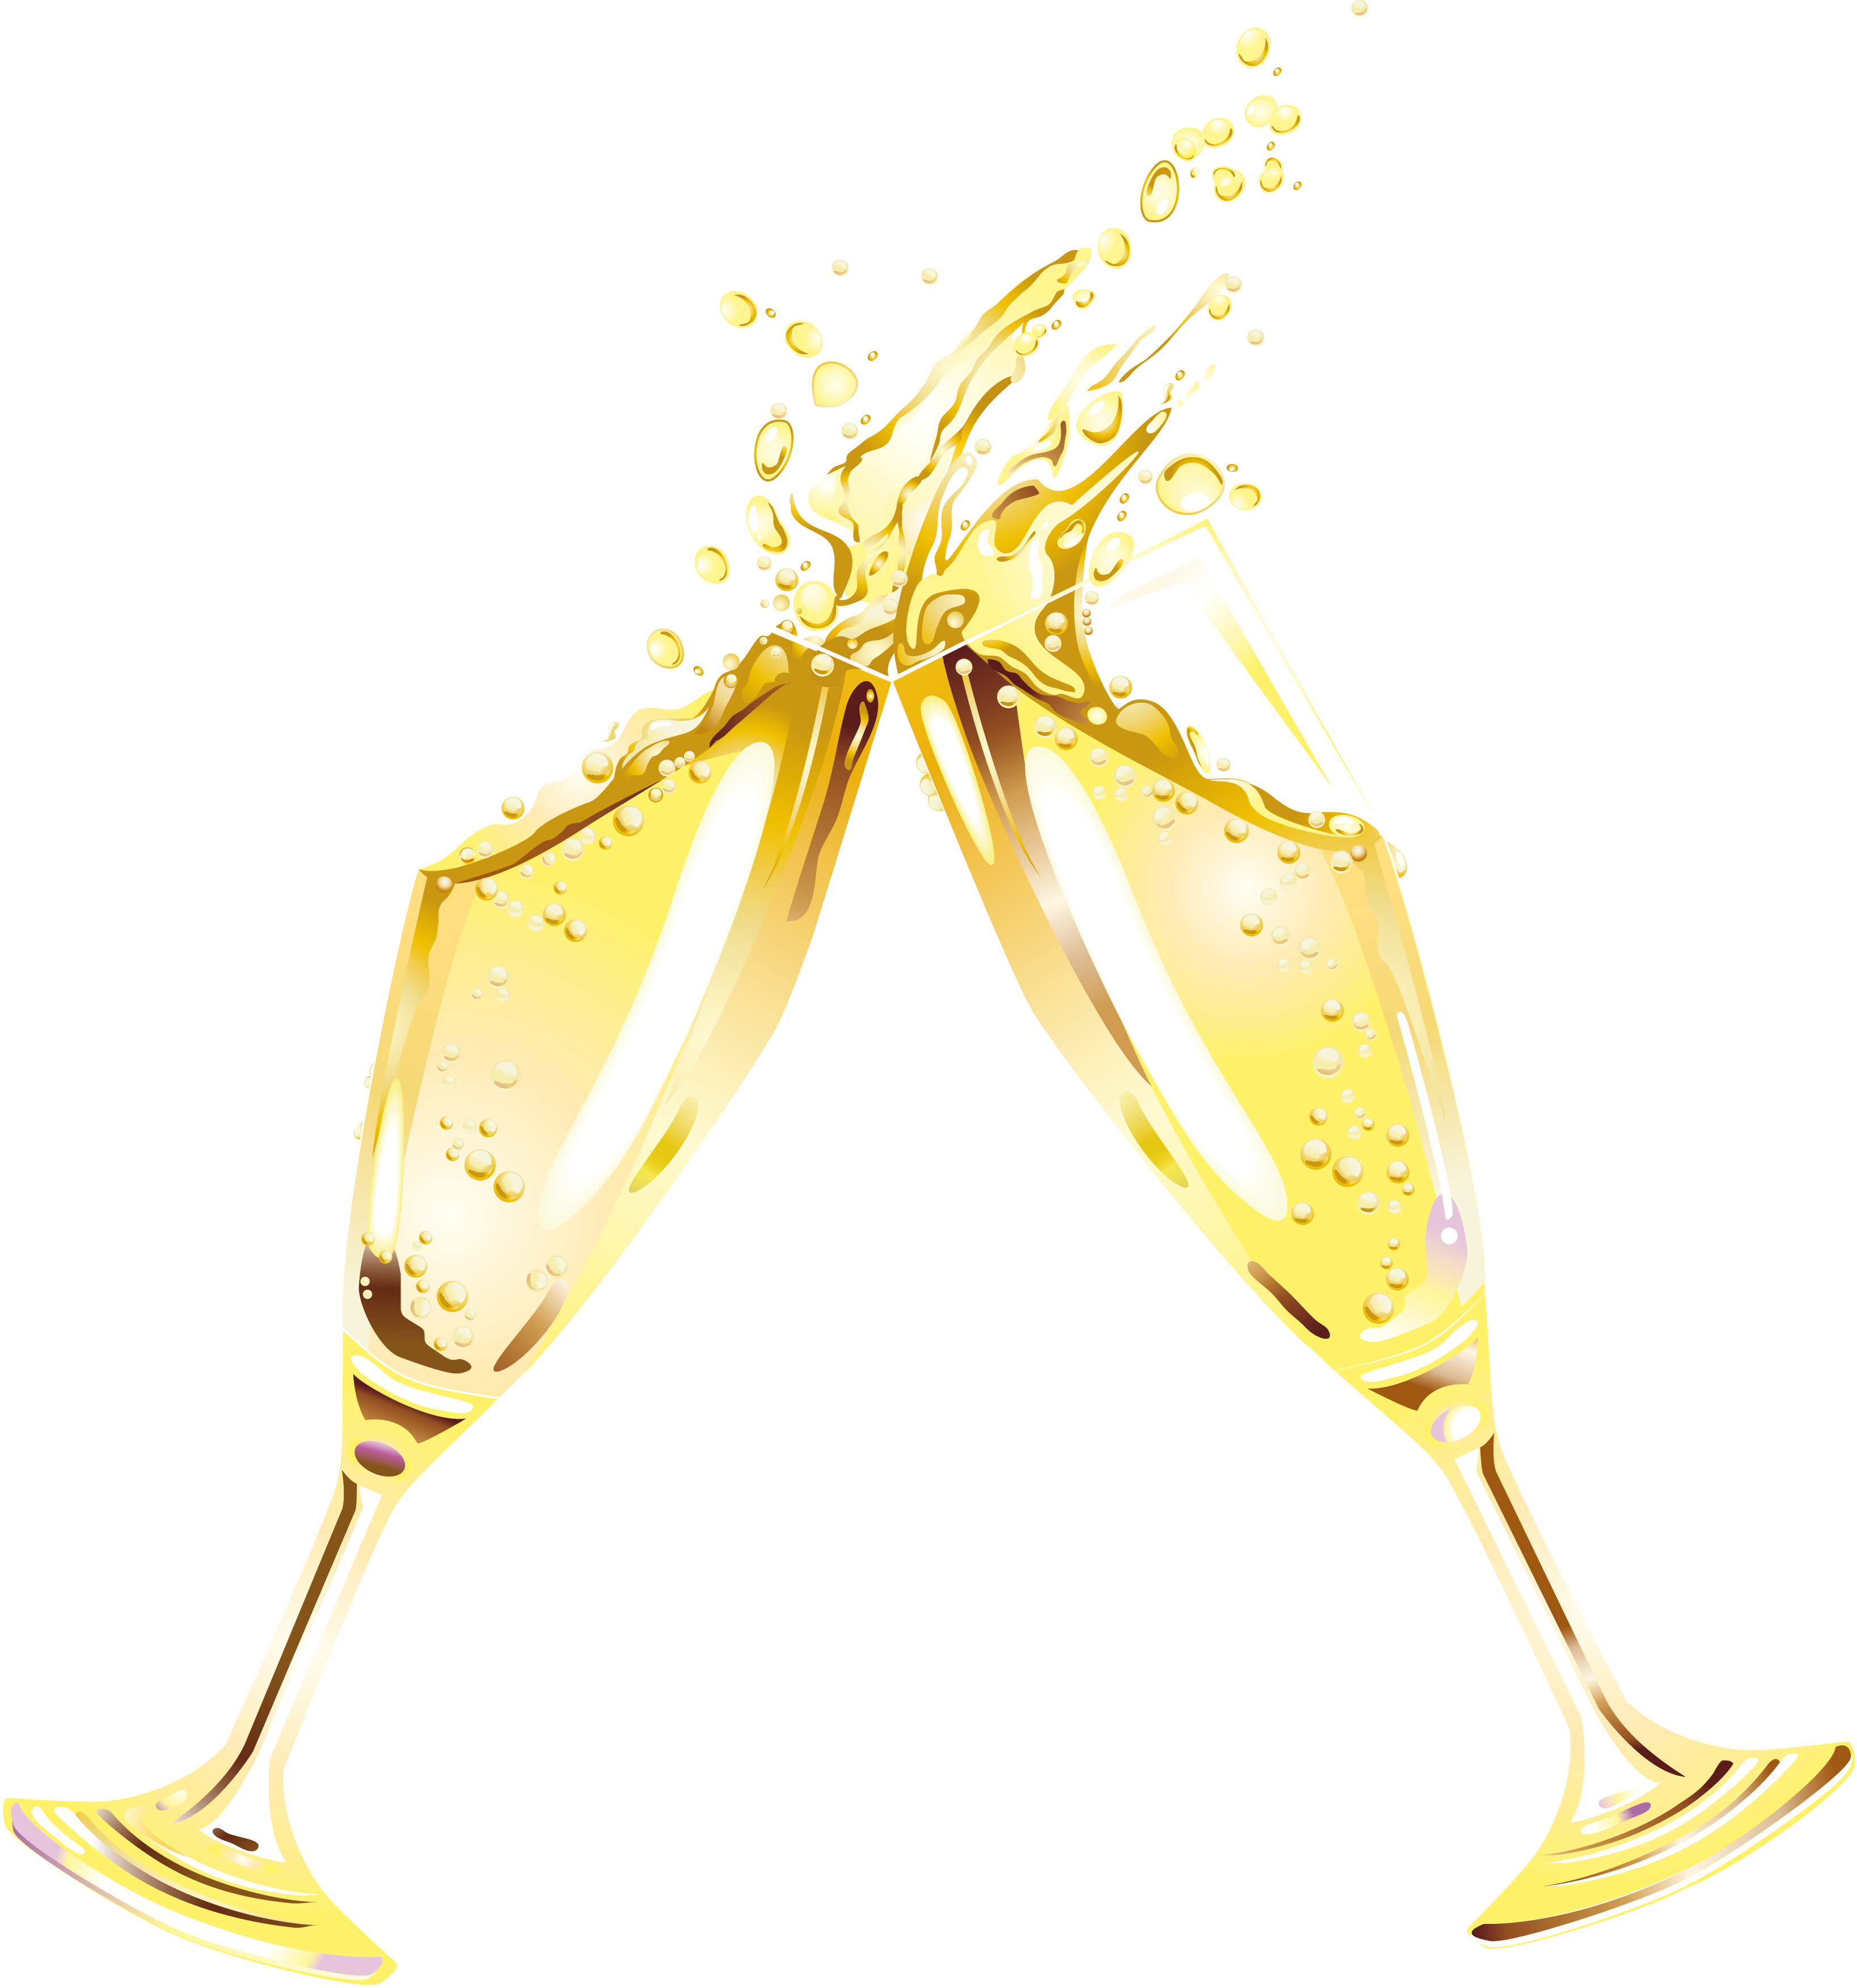 Champagne clipart transparent pencil and in color champagne png